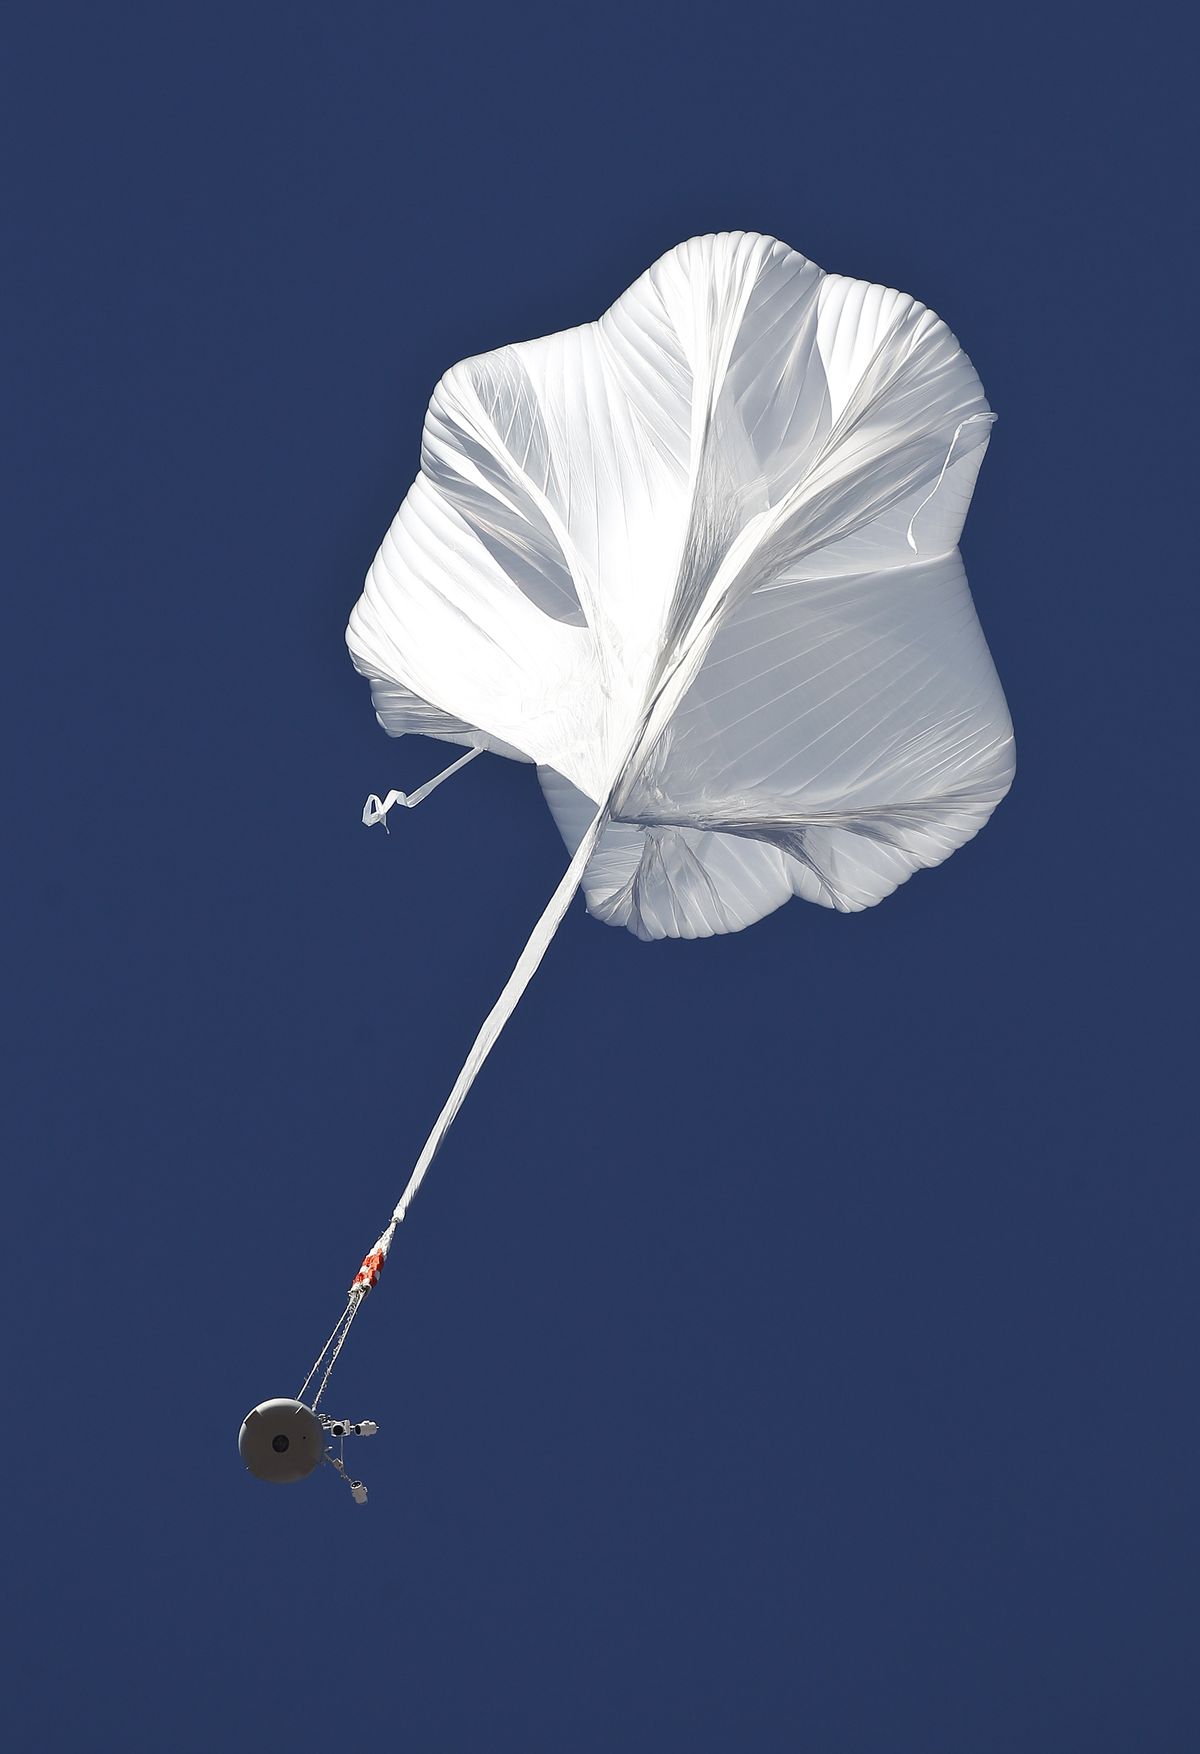 The capsule and attached helium balloon carrying Felix Baumgartner lifts off as he attempts to break the speed of sound with his own body by jumping from a space capsule lifted by a helium balloon, Sunday, Oct. 14, 2012, in Roswell, N.M.  Baumgartner plans to jump from an altitude of 120,000 feet, an altitude chosen to enable him to achieve Mach 1 in free fall, which would deliver scientific data to the aerospace community about human survival from high altitudes. (Ross Franklin / Associated Press)